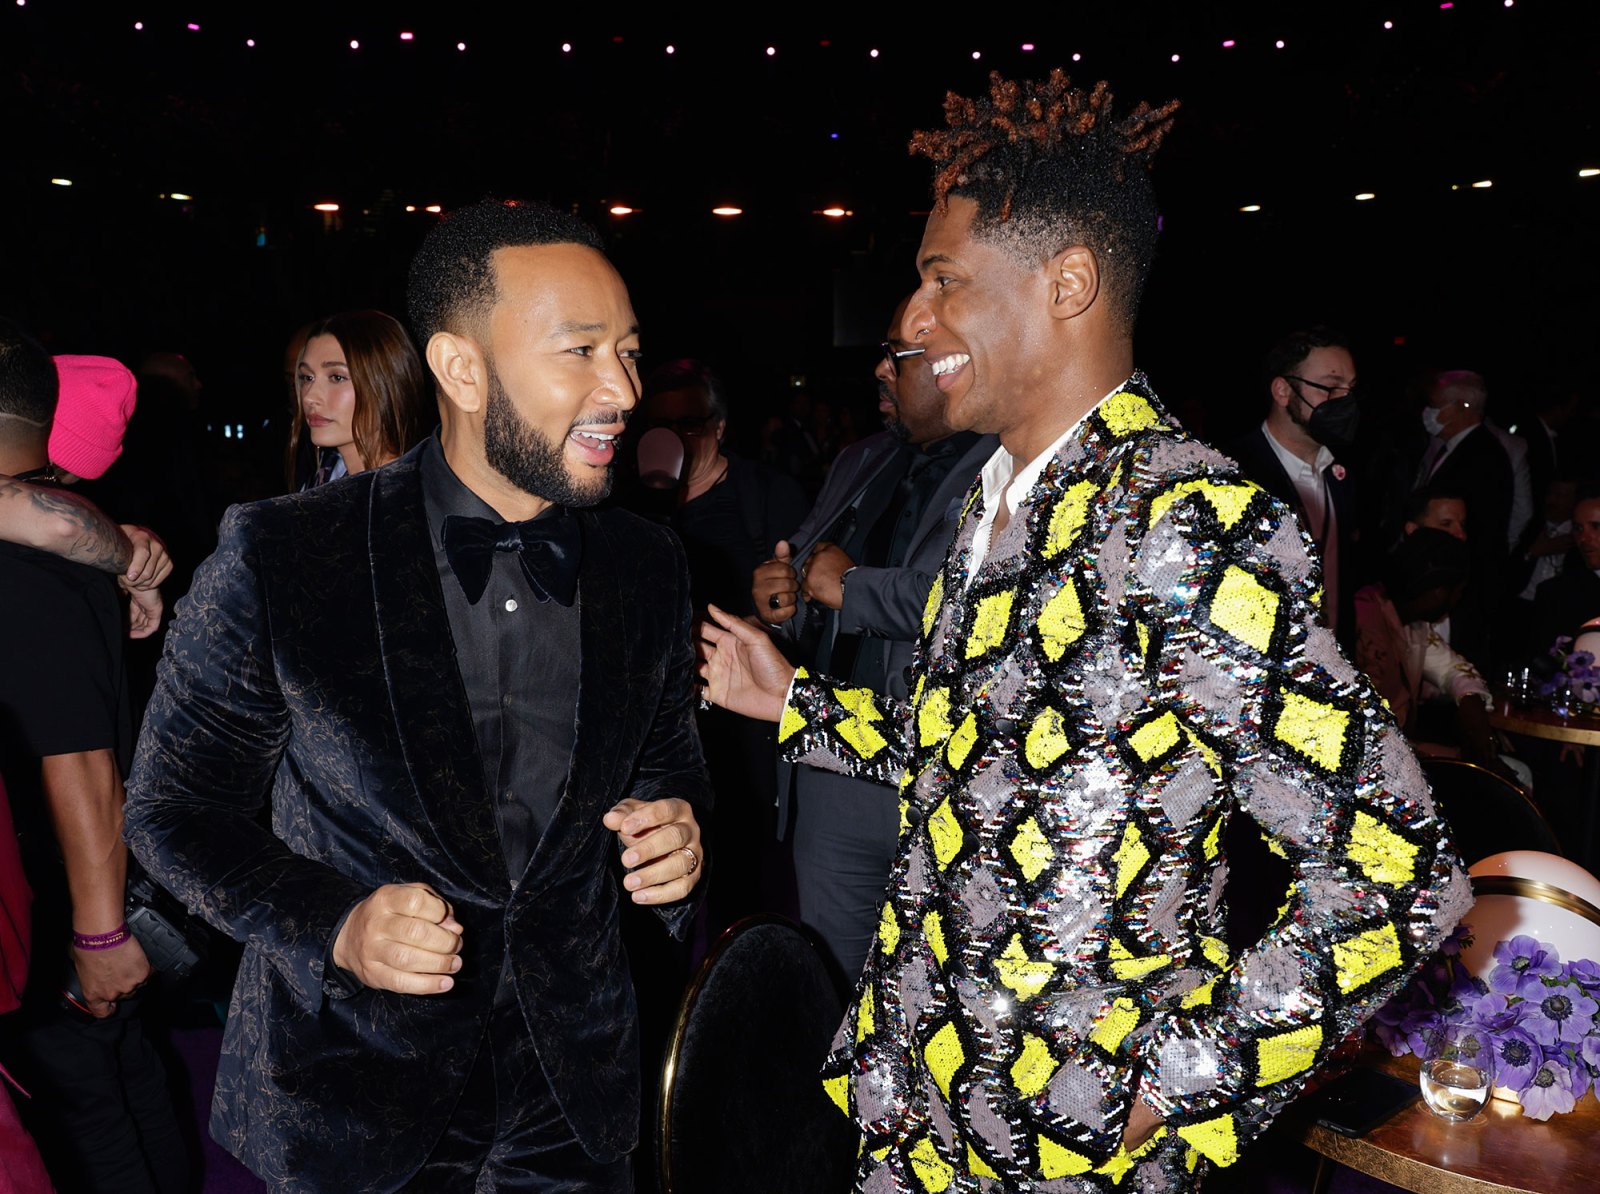 JOHN LEGEND AND JON BATISTE What You Didn't See On Tv Grammys 2022